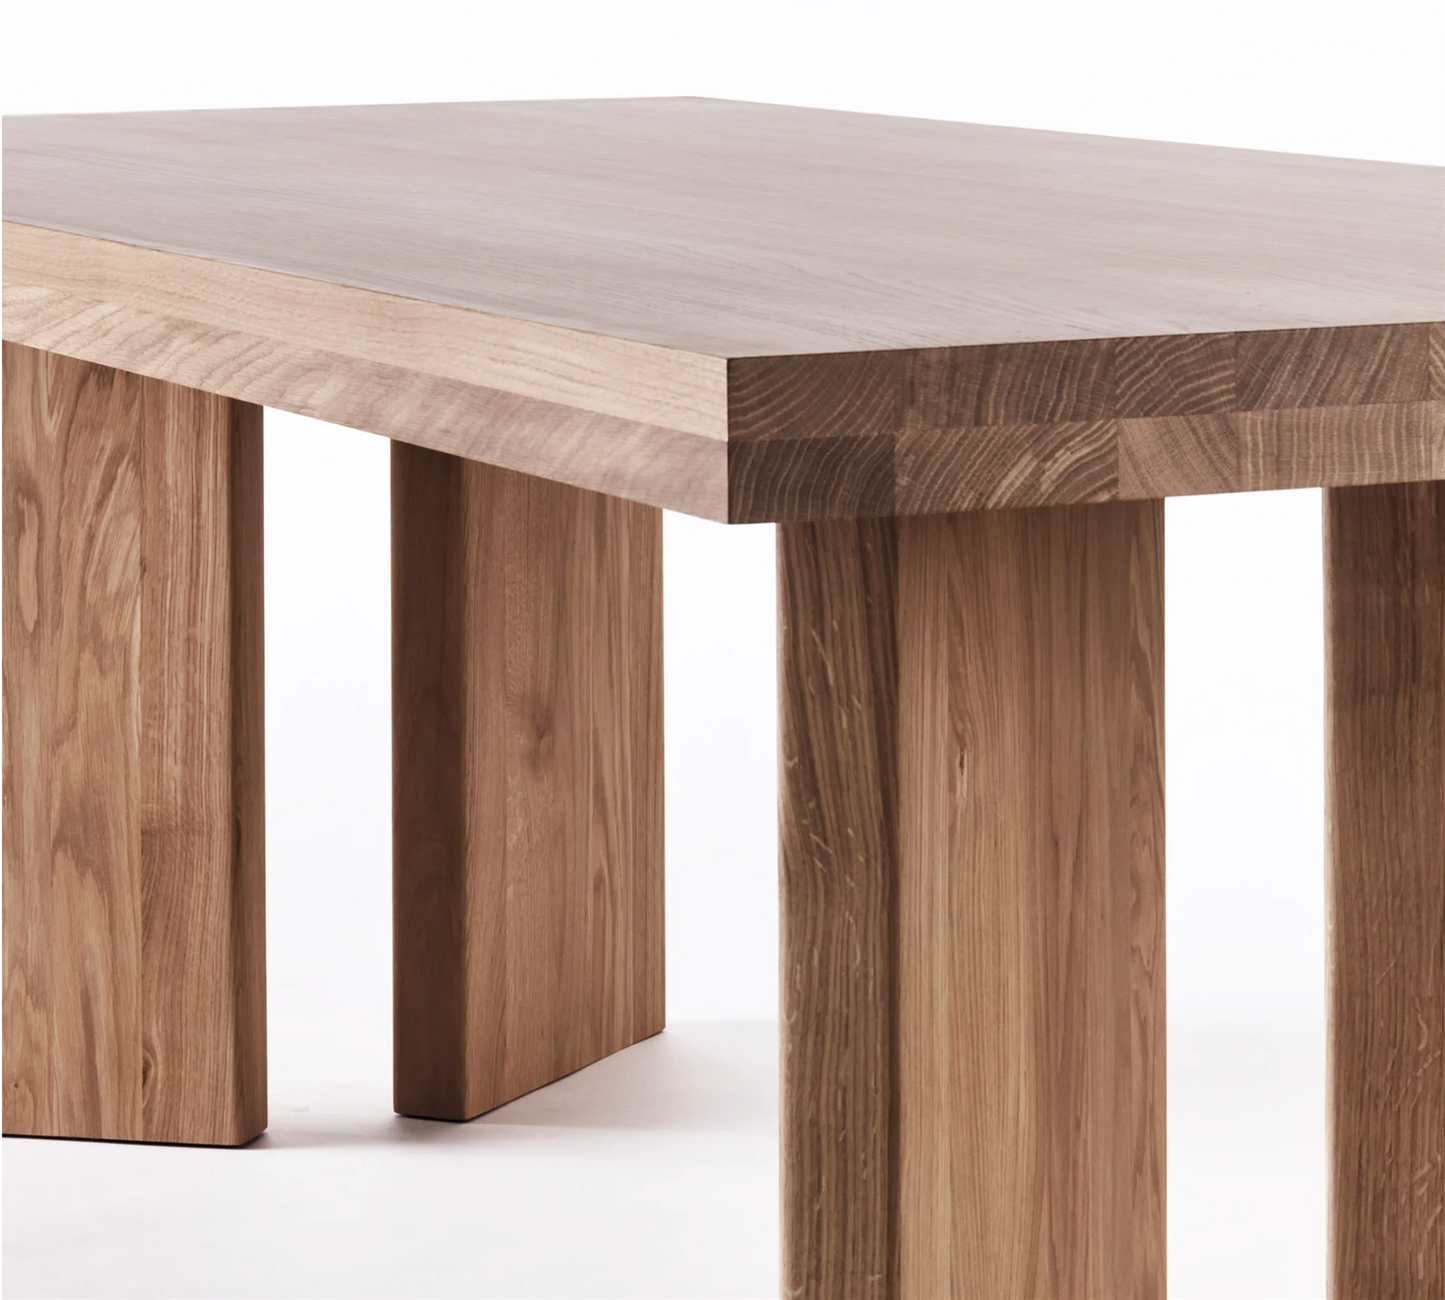 FRENCH DINING TABLE OAK 100-180 cm